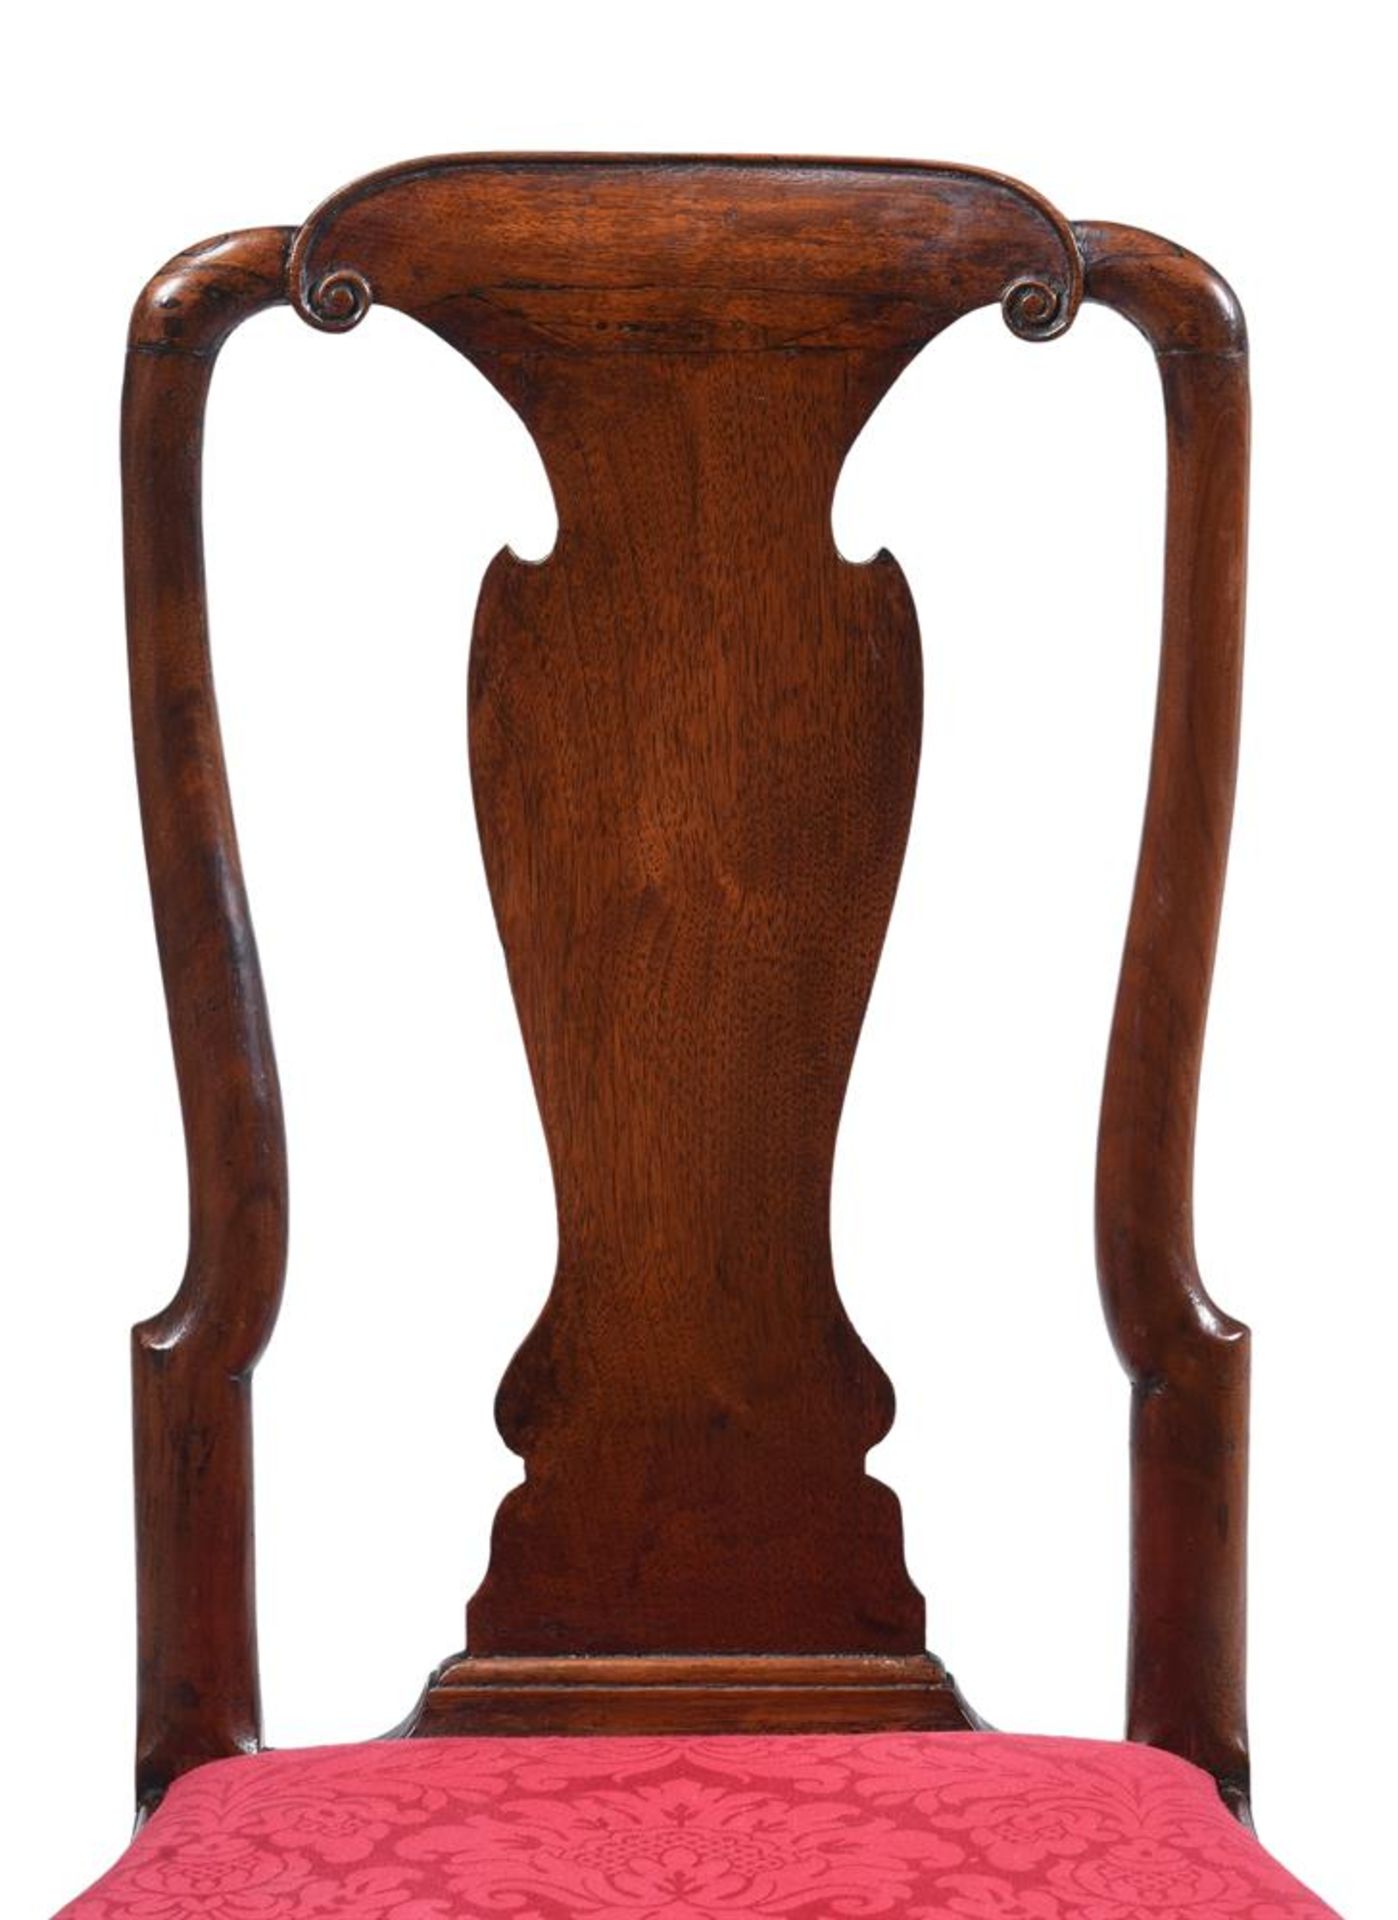 A PAIR OF GEORGE I WALNUT CHAIRS, CIRCA 1715 - Image 3 of 3